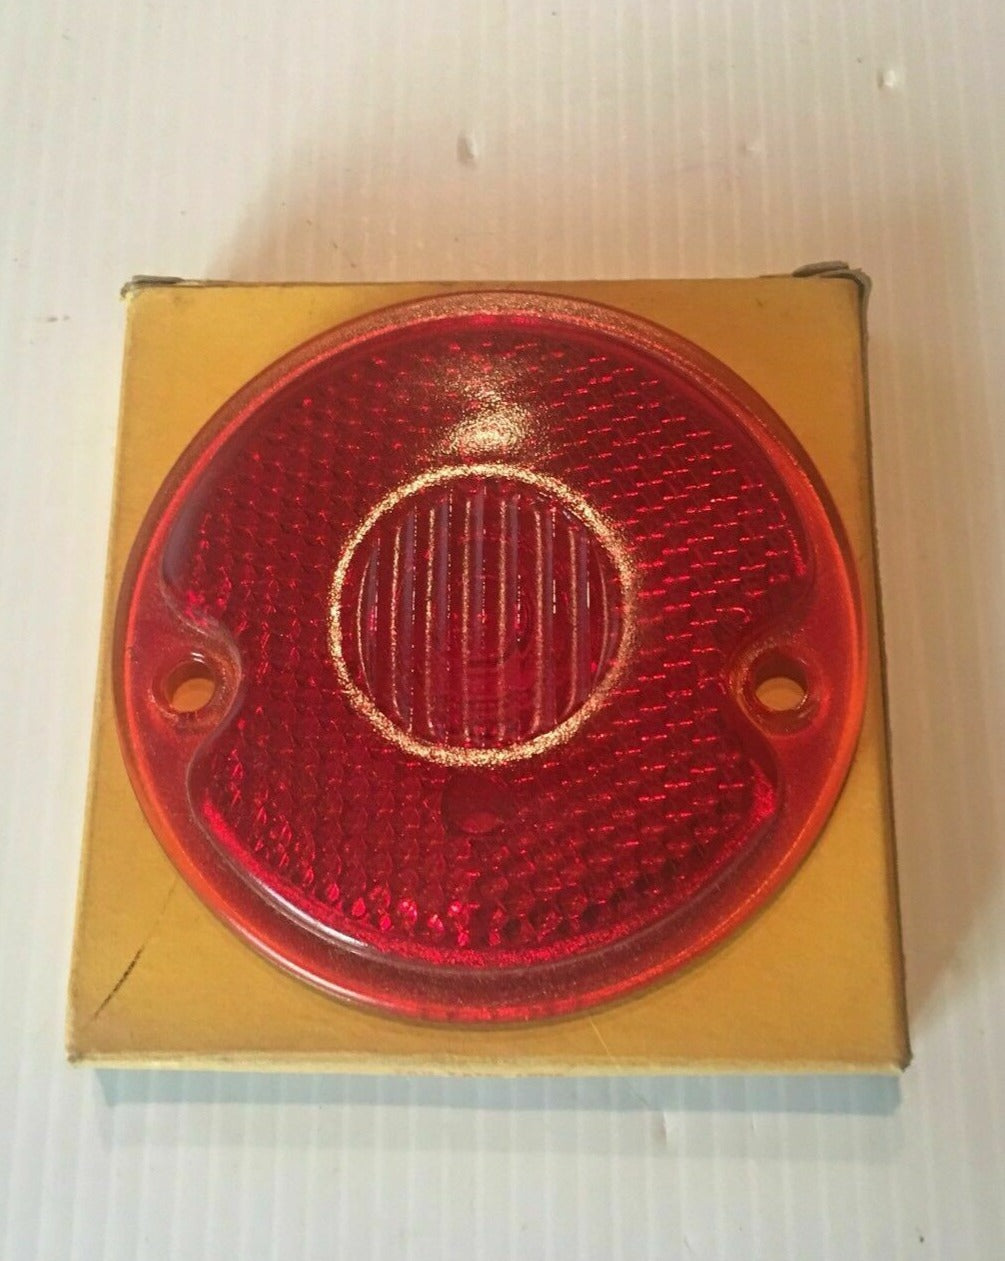 Tail Light Assemblies: NORS 1941 - 1952 Chevrolet Station Wagon 1947 - 1956 Panel Tail lamp Lens